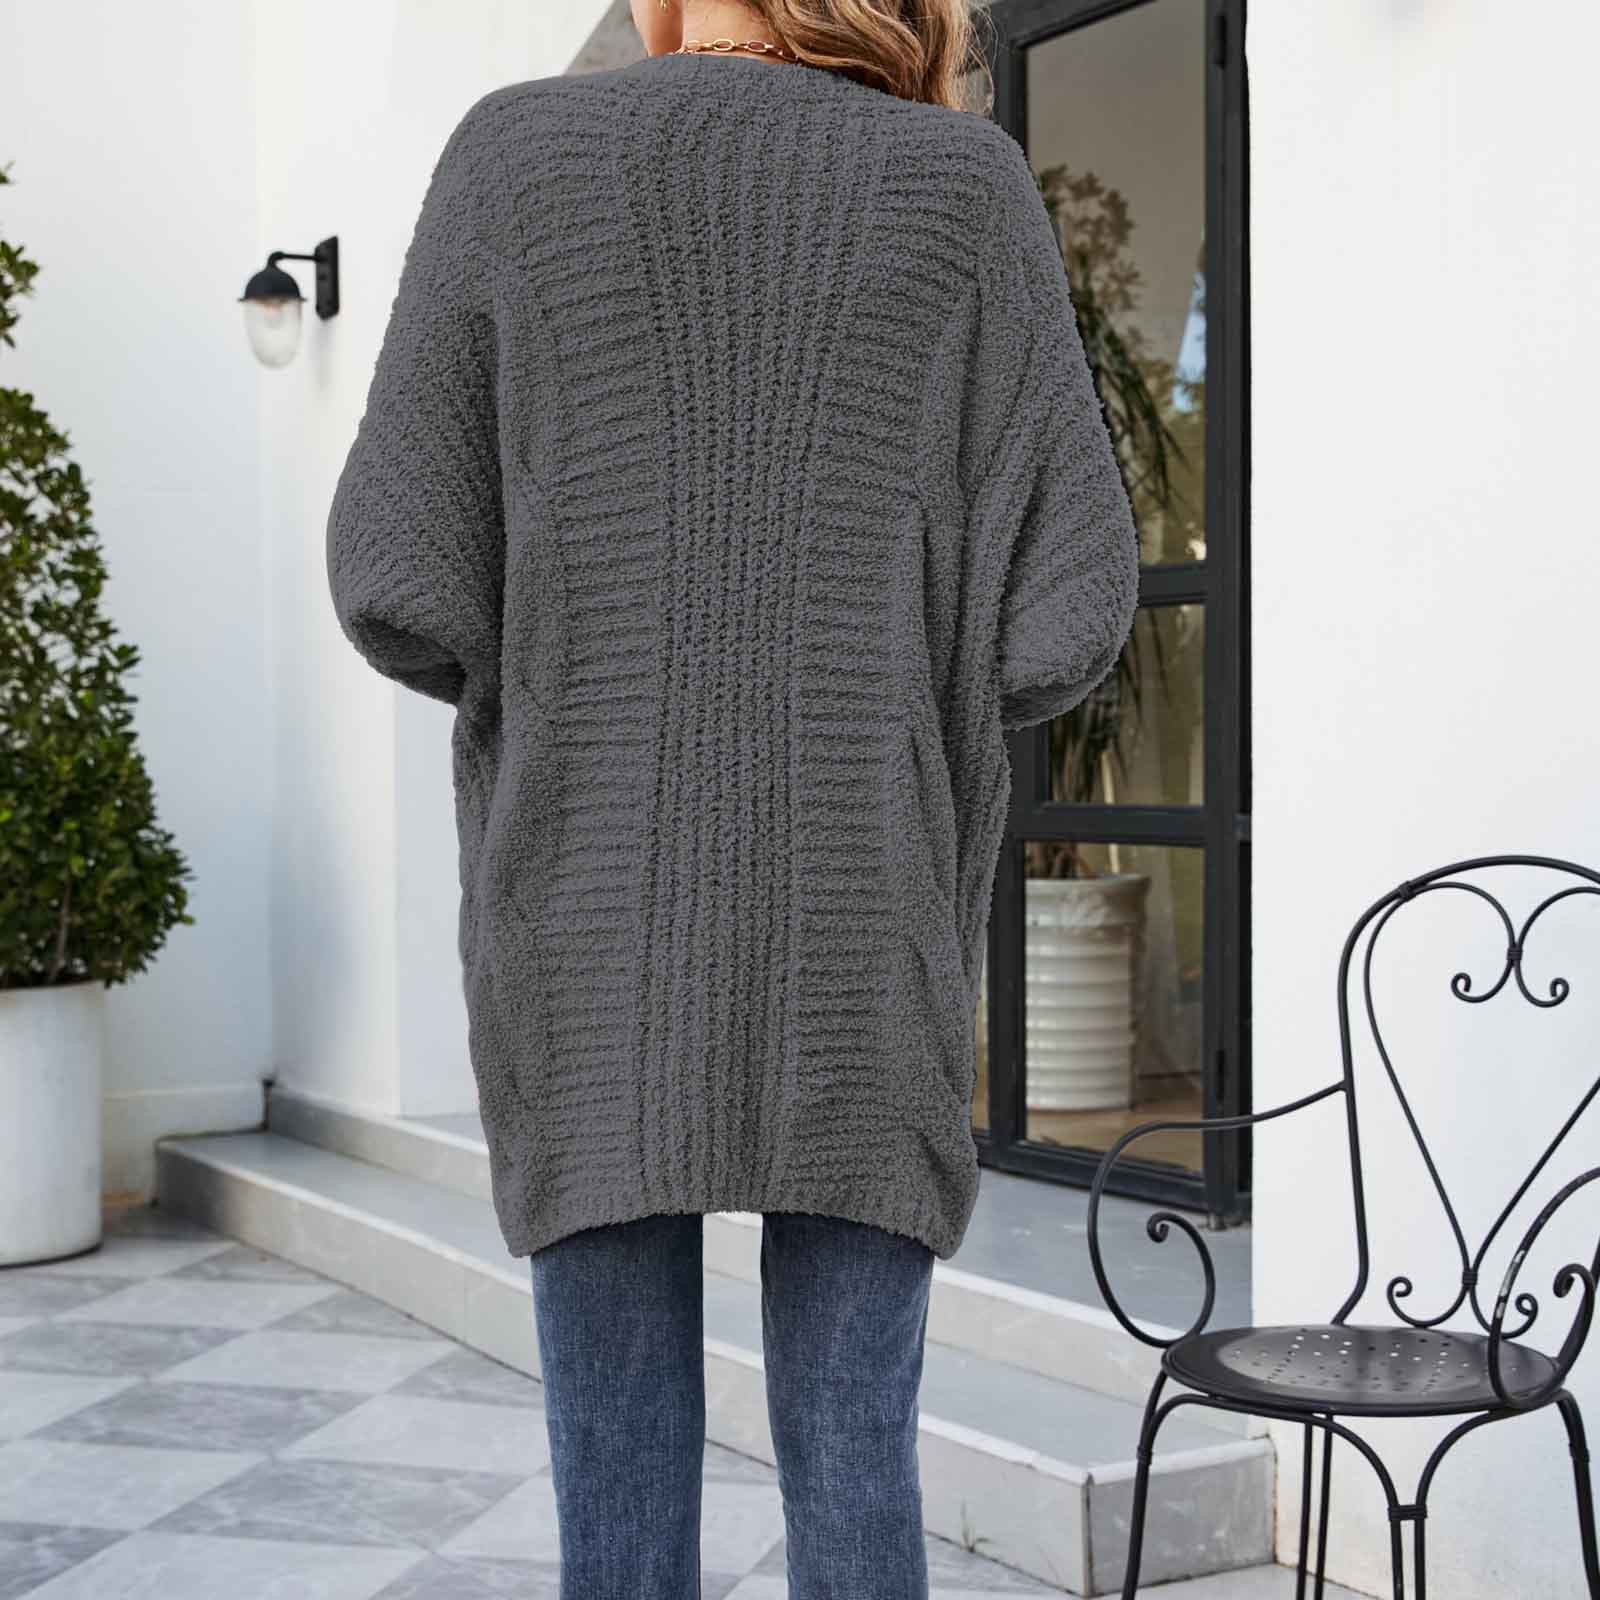 SMihono Clearance Long Sleeve Knit Cardigan Sweater Womens Loose Fashion  Open Front V Neck Solid Color Loose Tops Blouse Female Leisure Gray S 